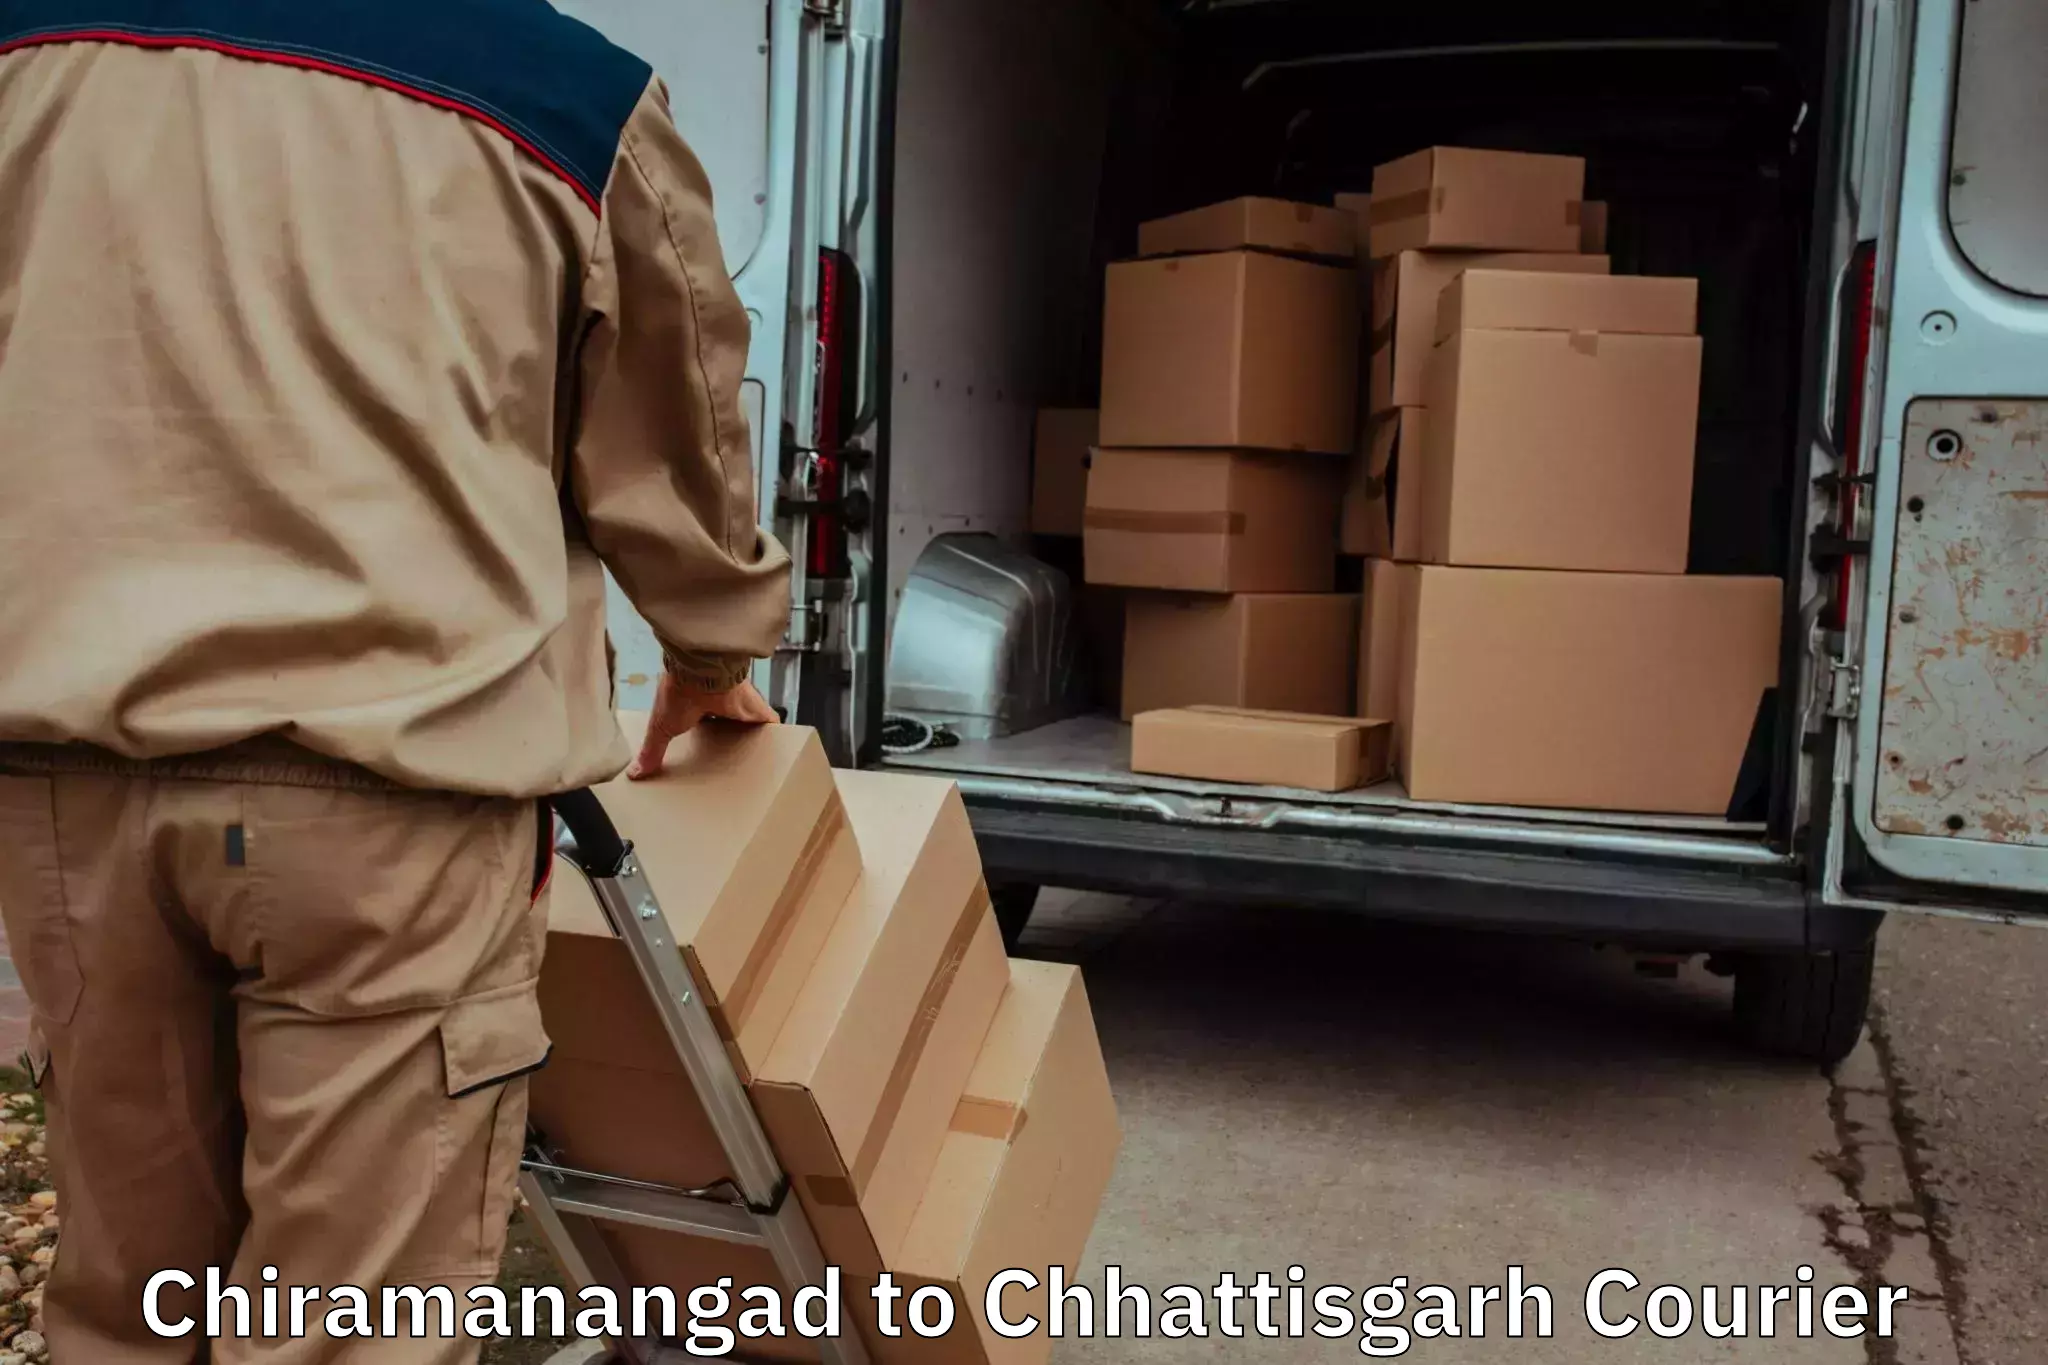 Reliable relocation services in Chiramanangad to Baramkela